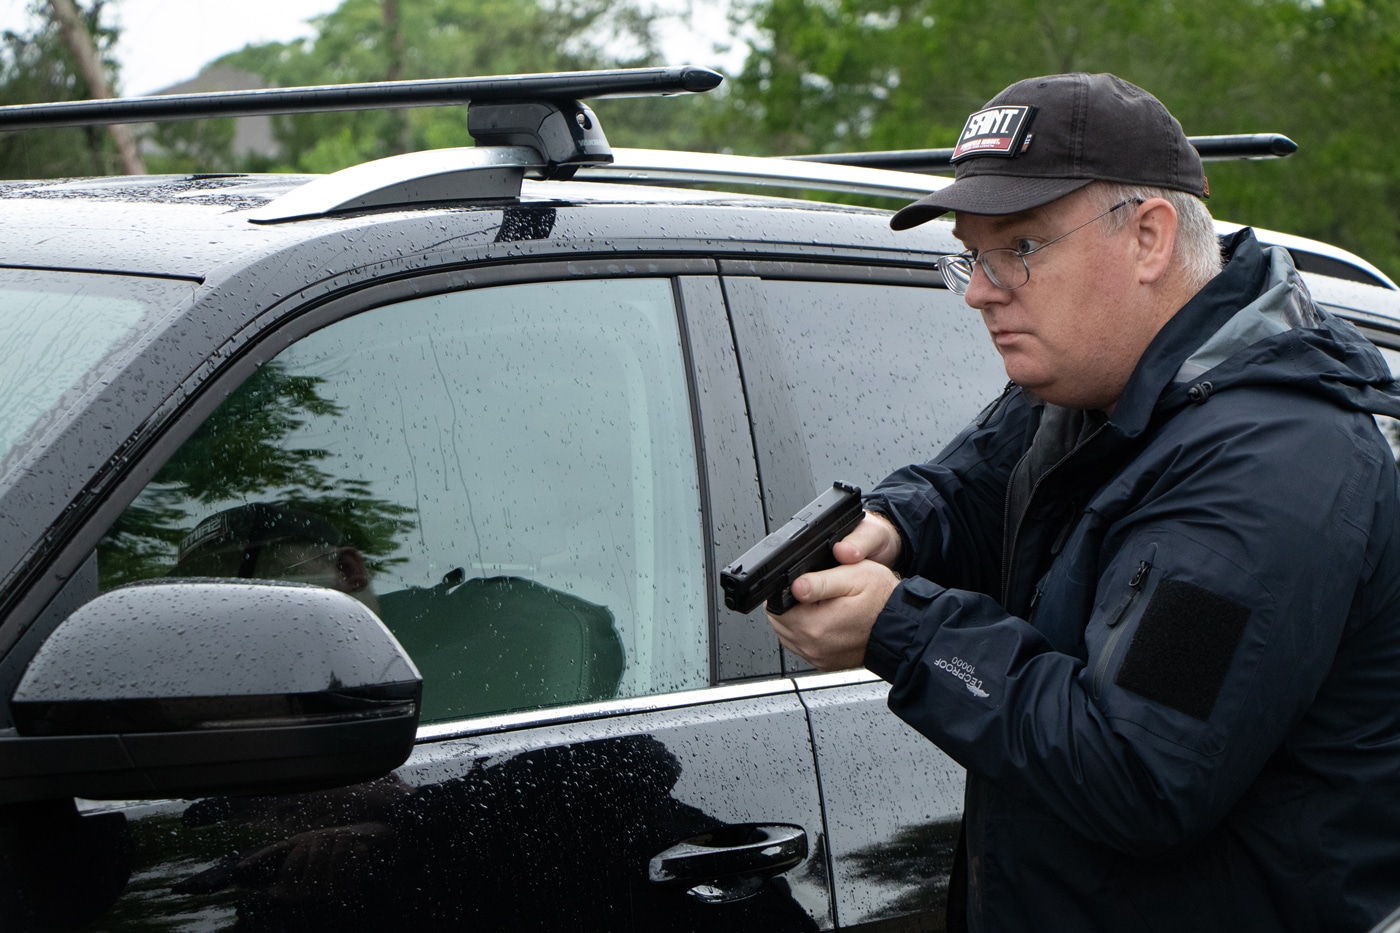 In this photograph, we see Richard Johnson, the Managing Editor of The Armory Life, with a Springfield Armory Hellcat 9mm pistol. The semi-automatic pistol is perfect for self-defense and personal protection. Richard Johnson is wearing a ballcap hat and a weatherproof jacket. It is raining.